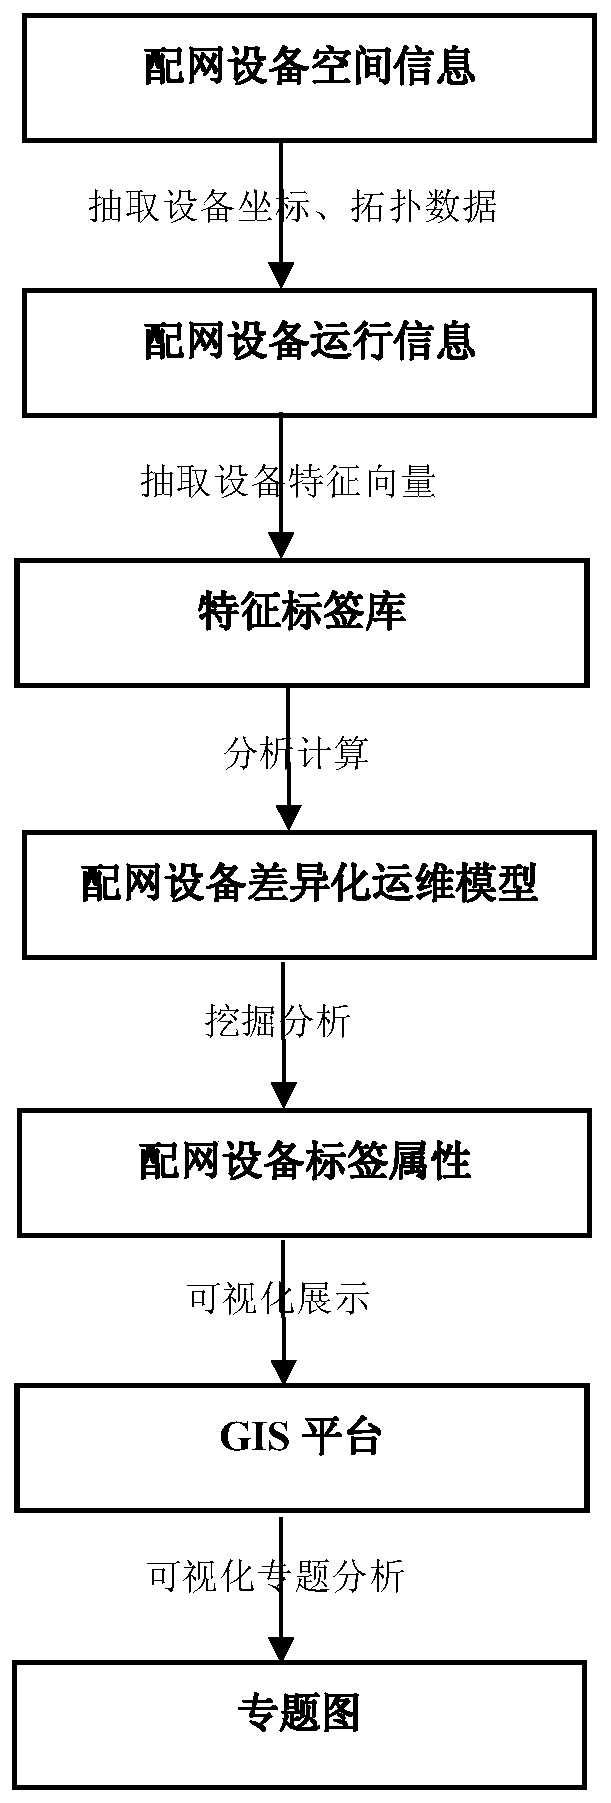 Power distribution network equipment visualization auxiliary operation and maintenance method based on geographic information system